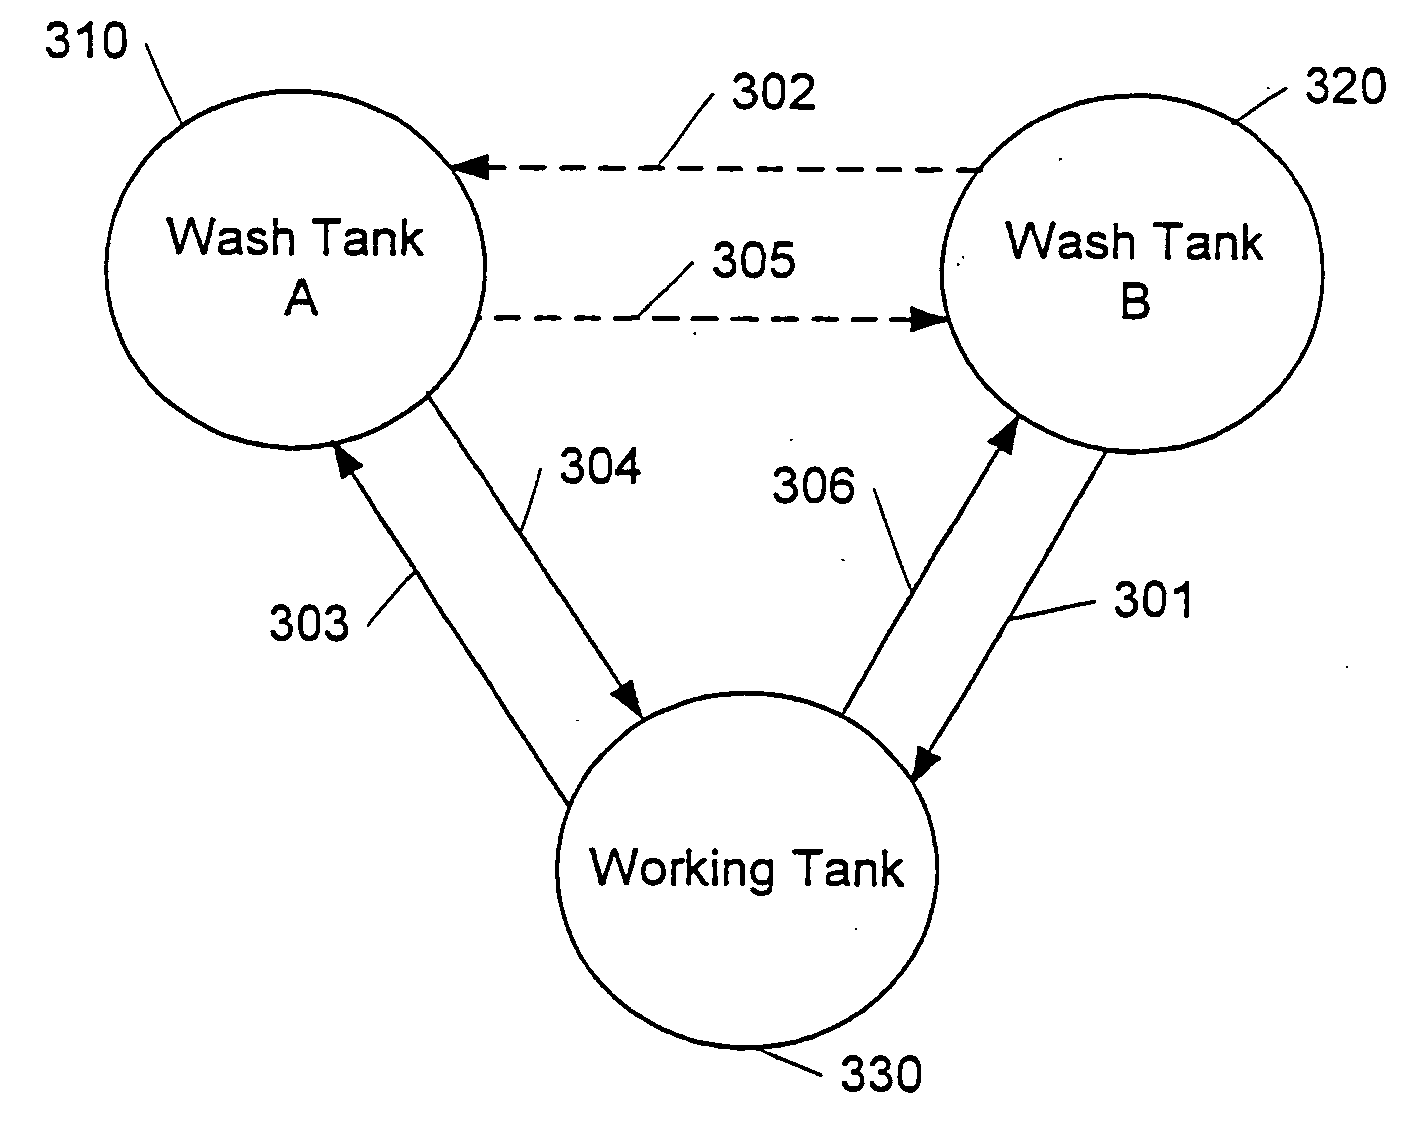 Cleaning apparatus having multiple wash tanks for carbon dioxide dry cleaning and methods of using same